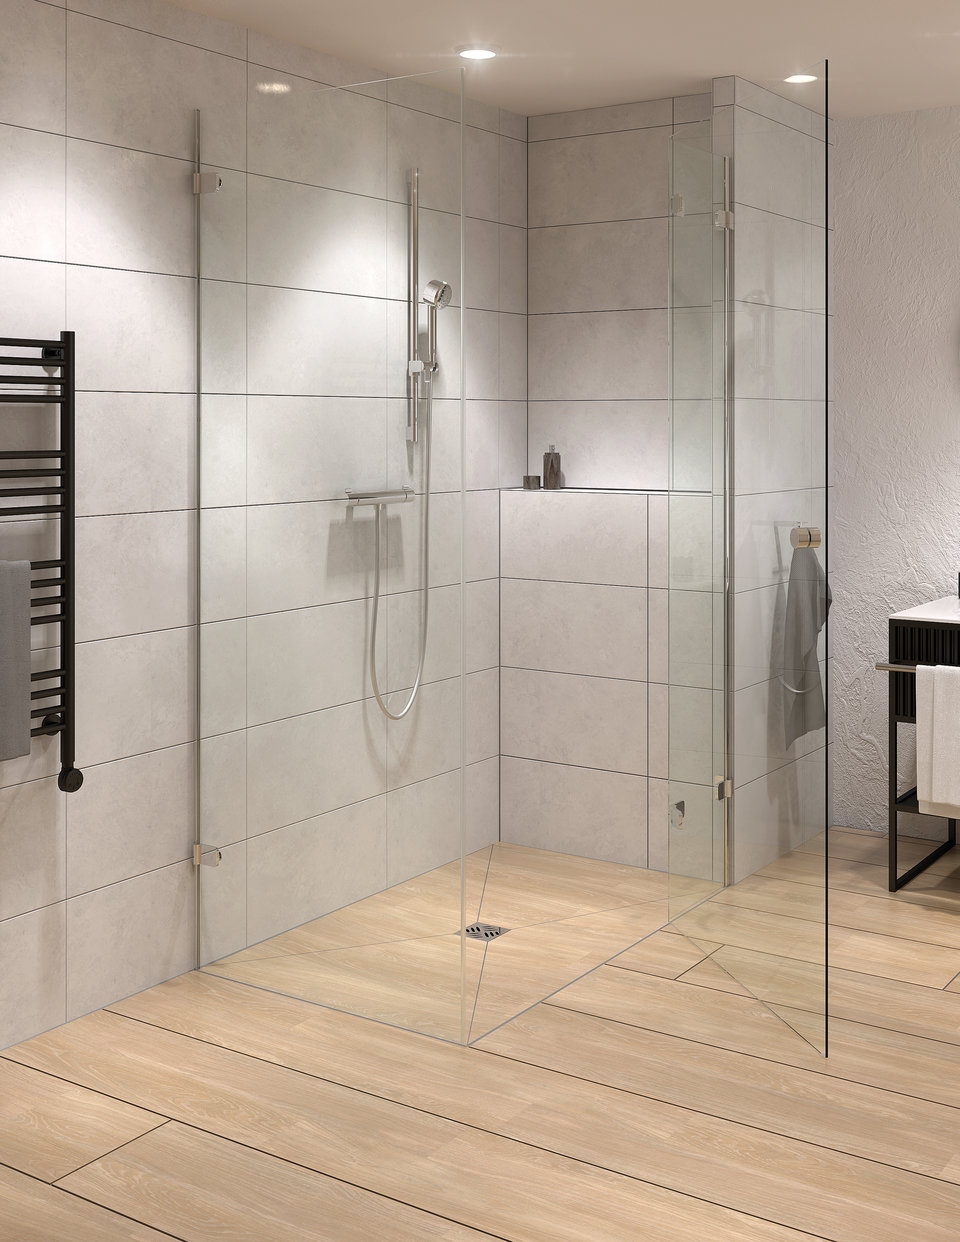 Barrier-free shower element that can be tiled